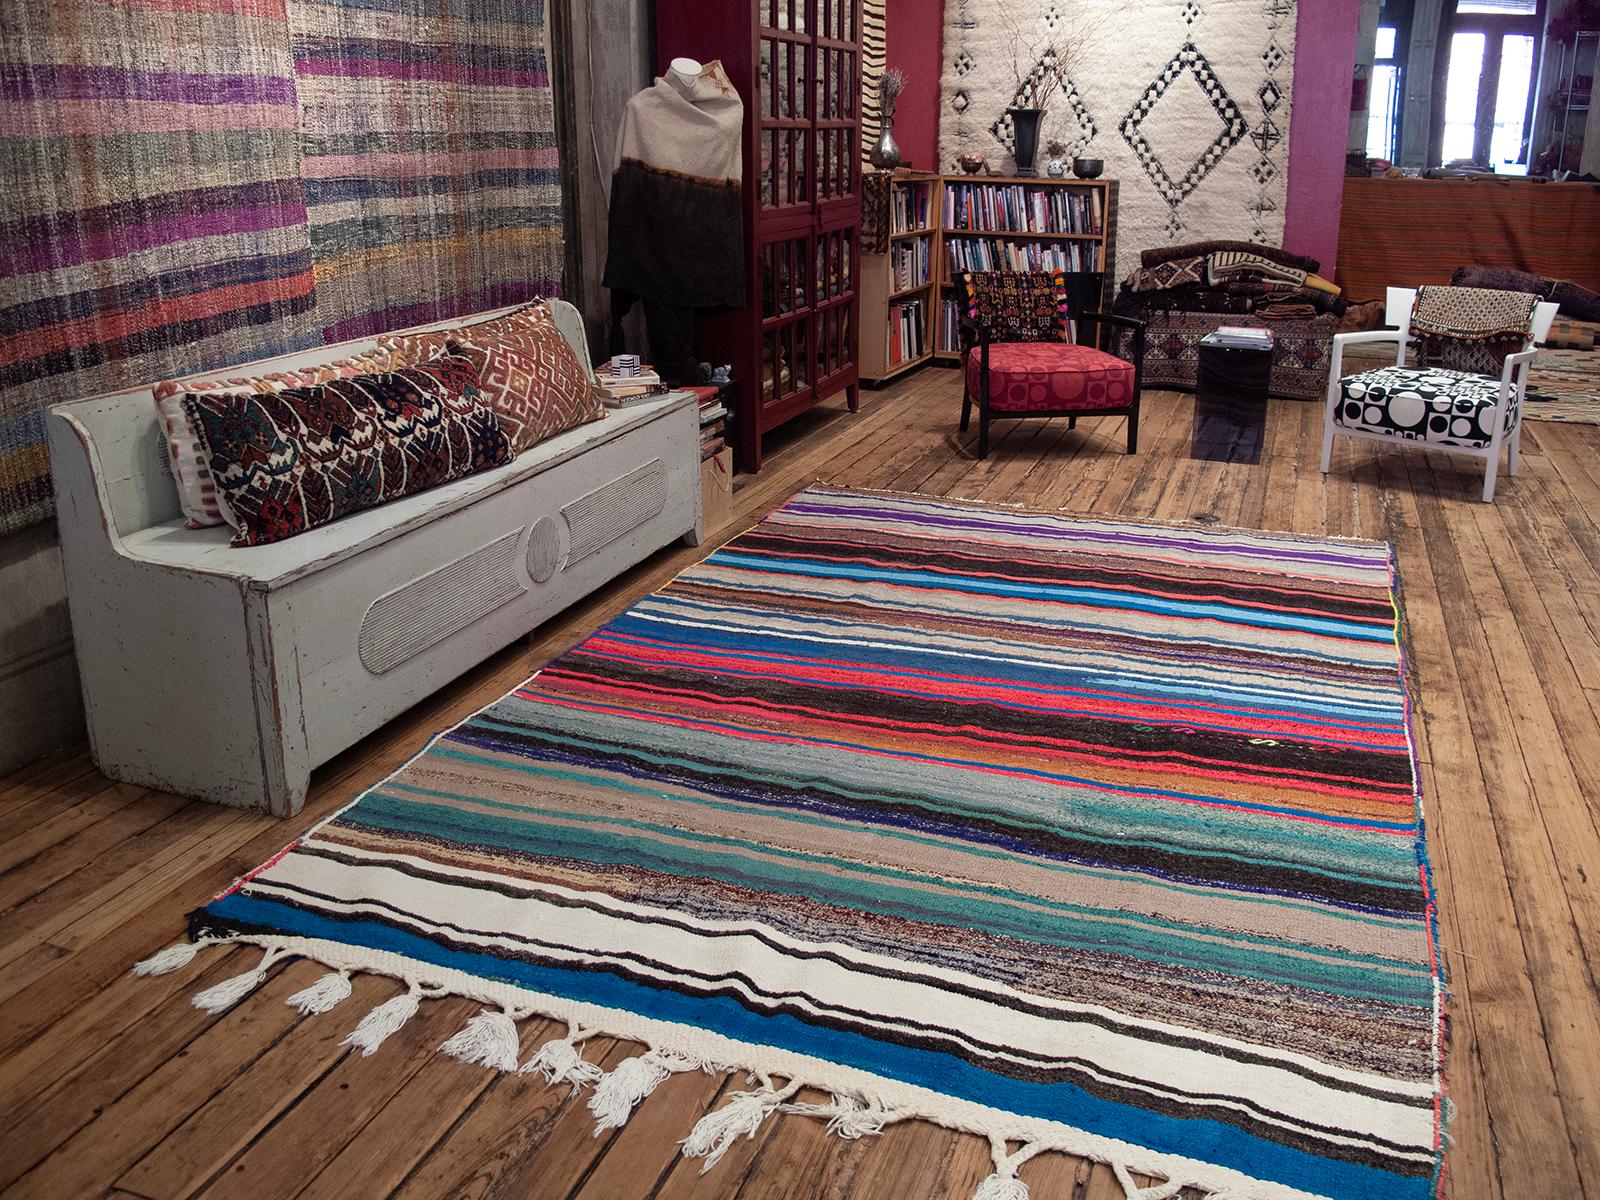 A brightly colored tribal kilim (flat-weave), woven with a mixture of wool, goat hair and cotton.